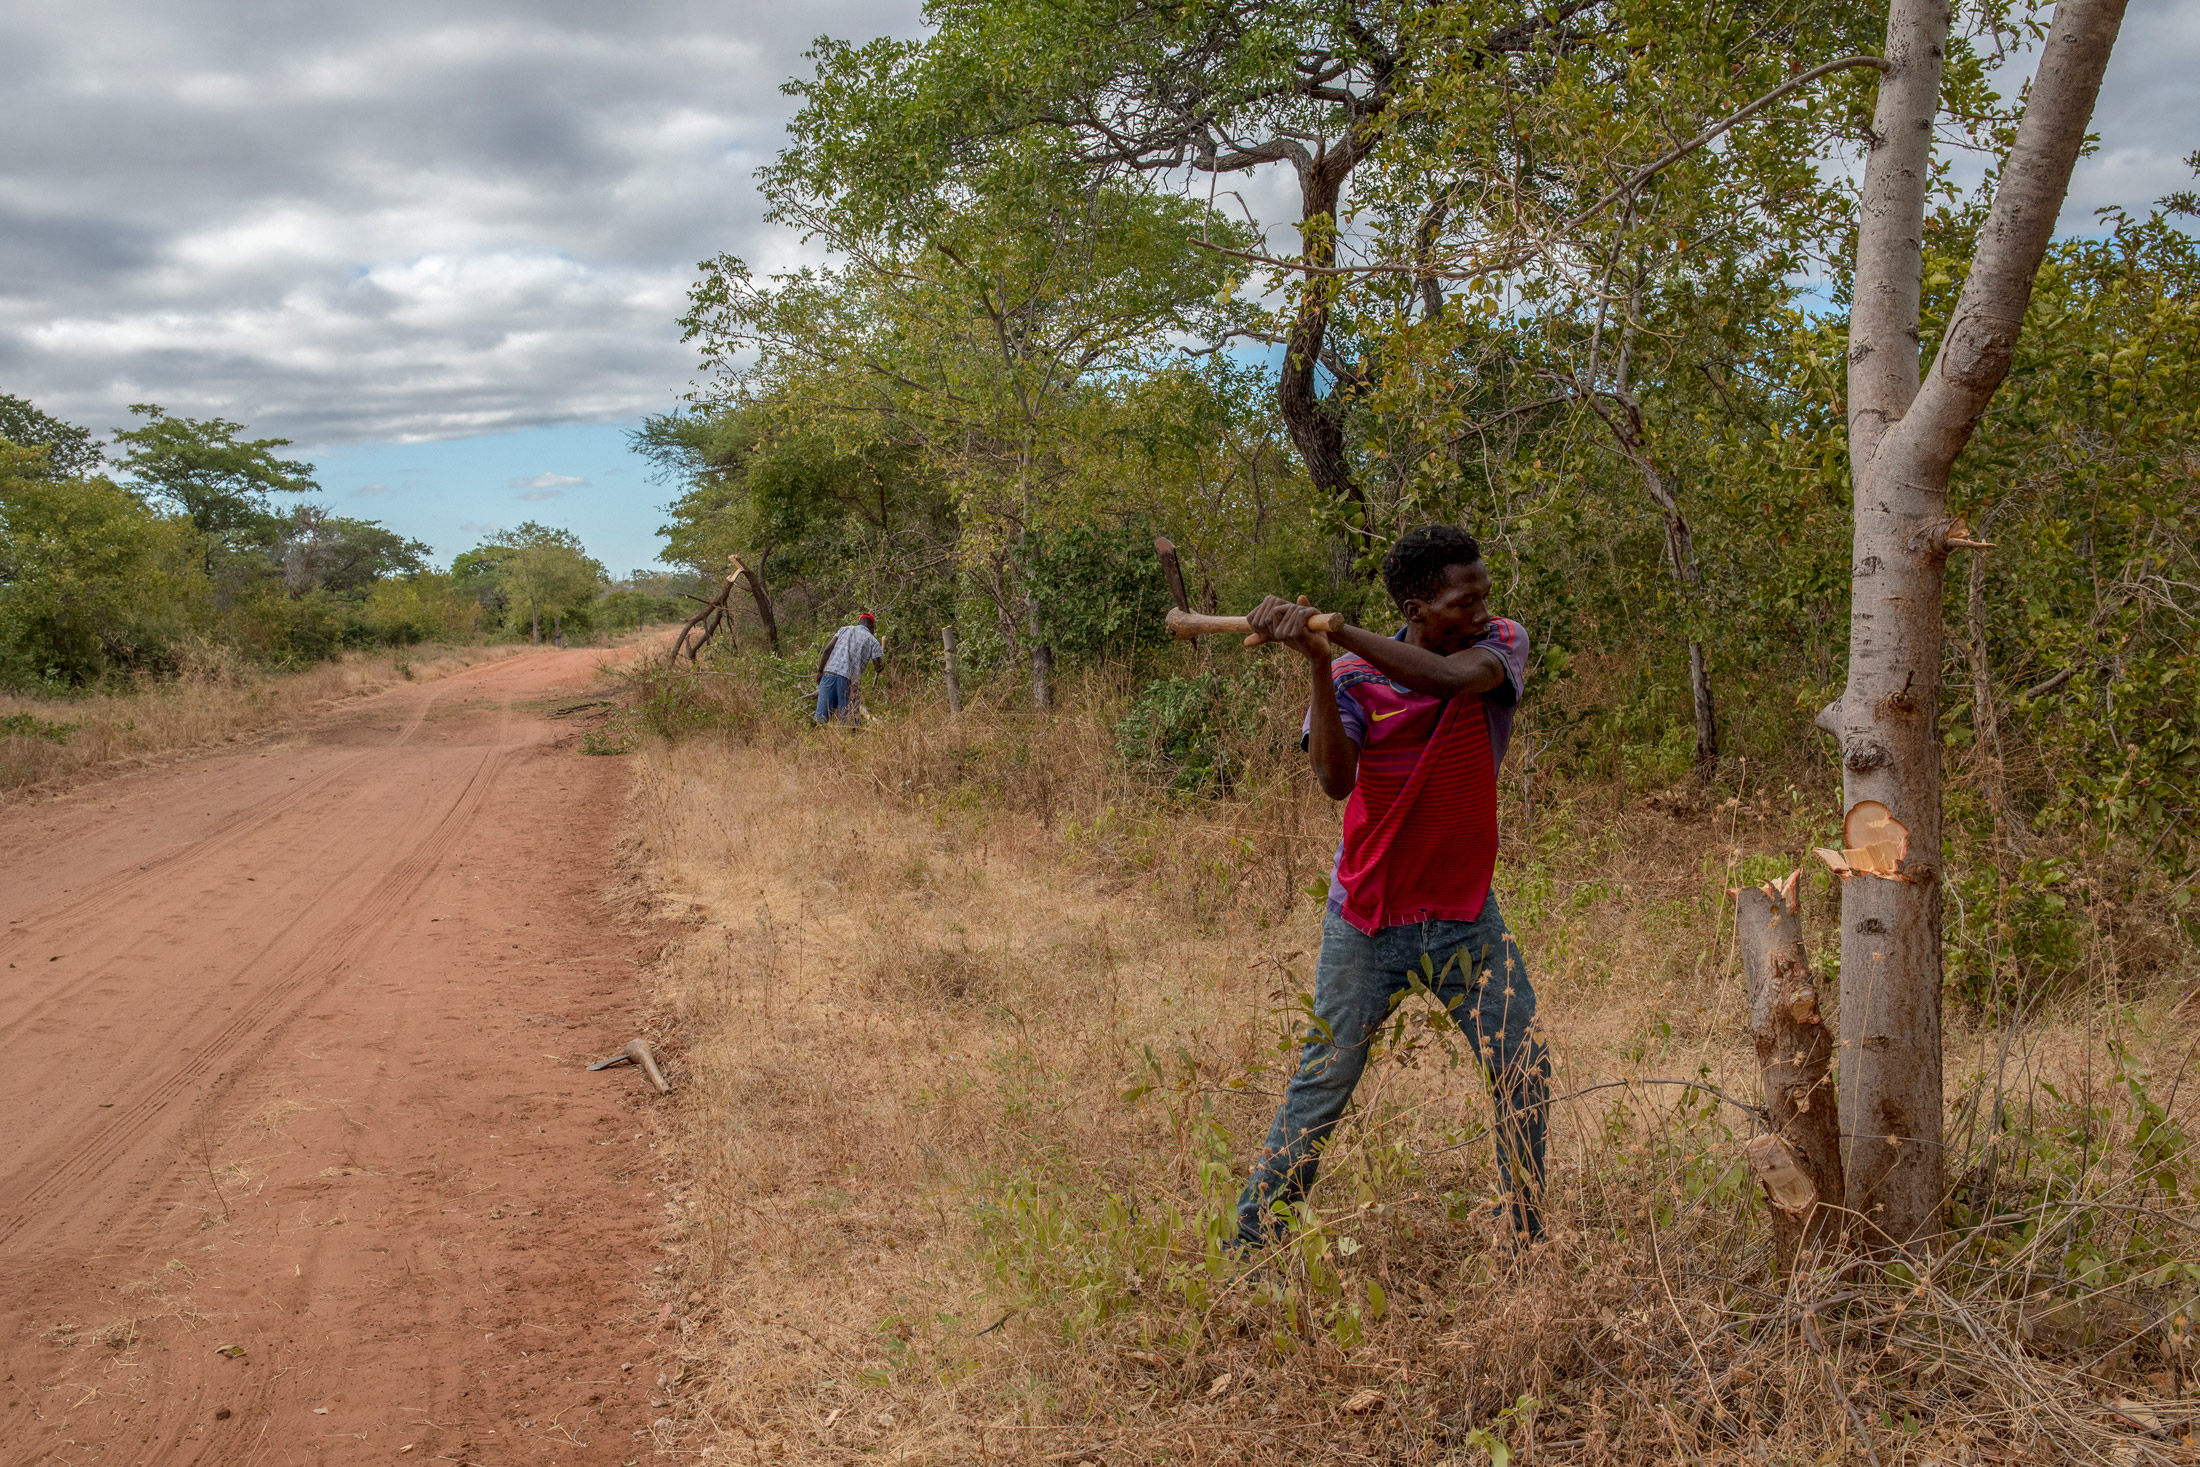 Volunteers clear&nbsp;vegetation that would otherwise stoke wildfires in forests around their village near&nbsp;Mbire, Zimbabwe. Their work is funded, in part, by the sale of fossil fuel thousands of miles away.